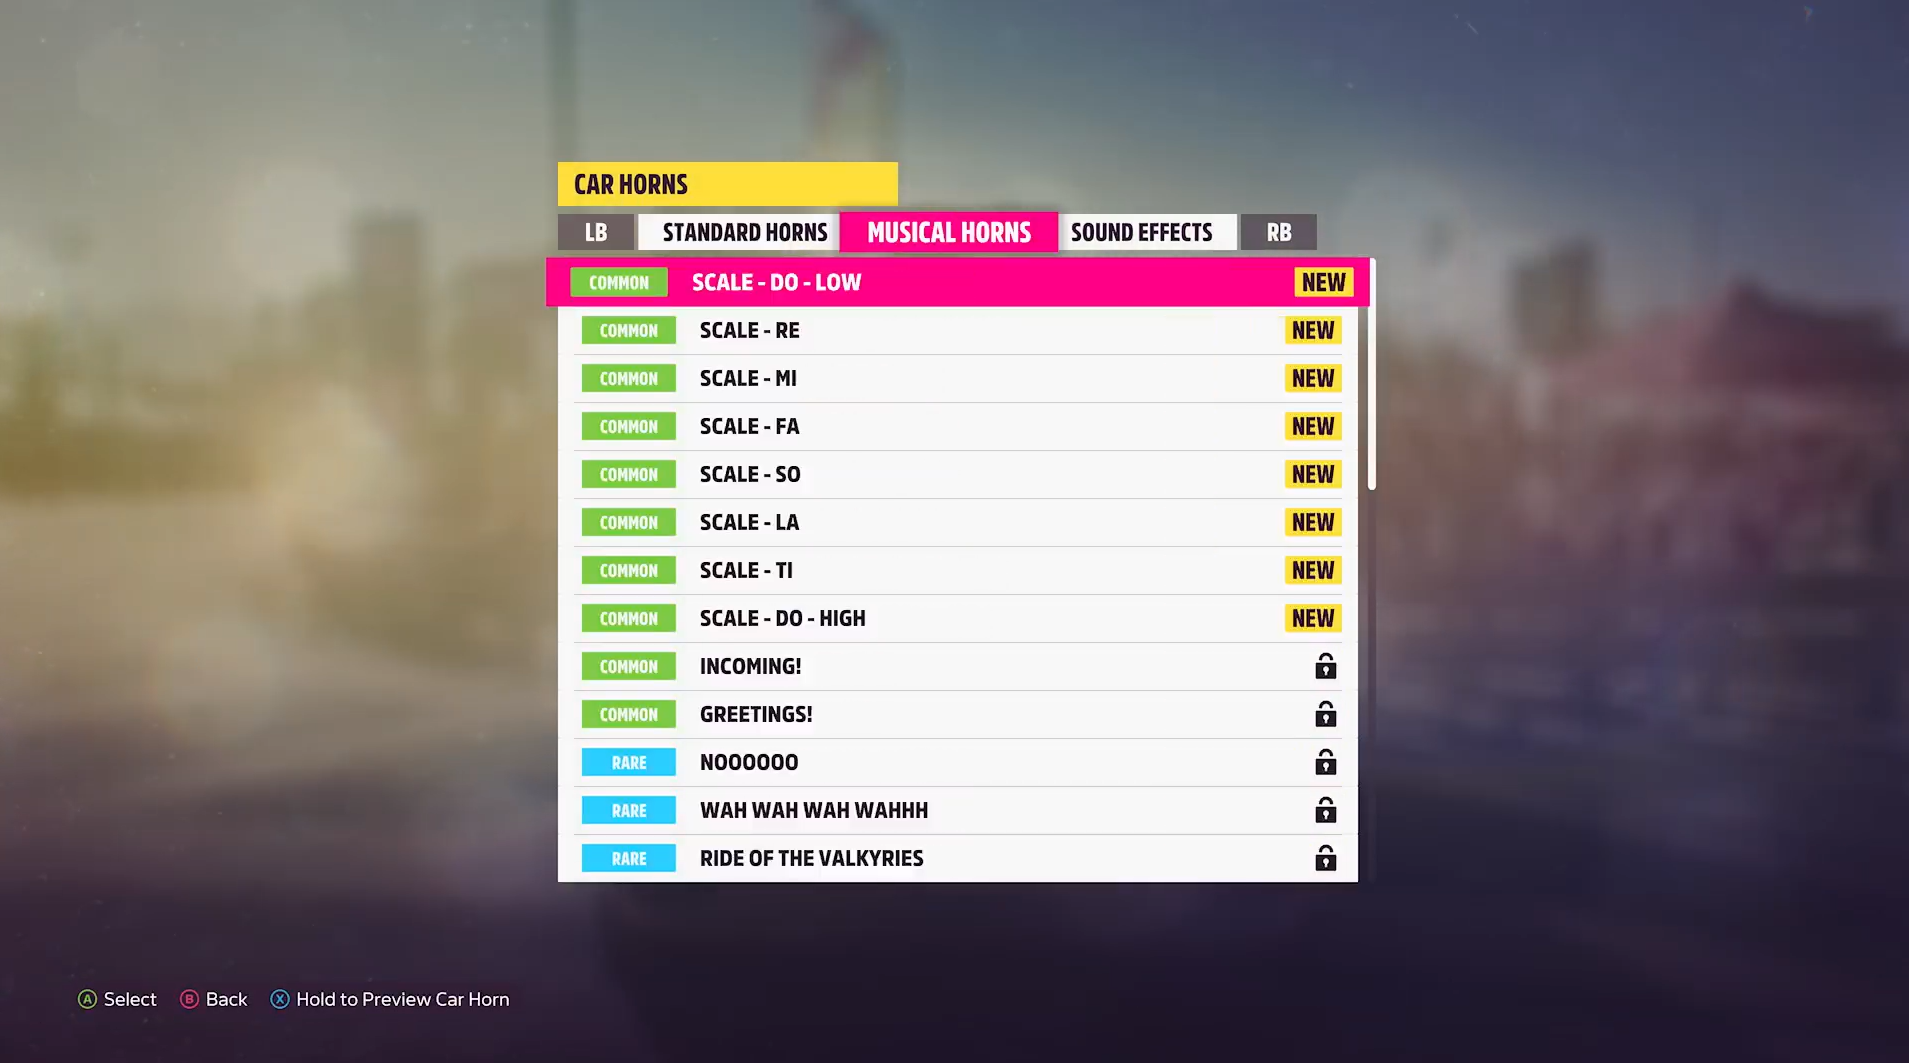 A screenshot that shows the Forza Horizon 5 Car Horns menu. The entire screen is displayed, including the Standard Horns, Musical Horns, and Sound Effects tabs.